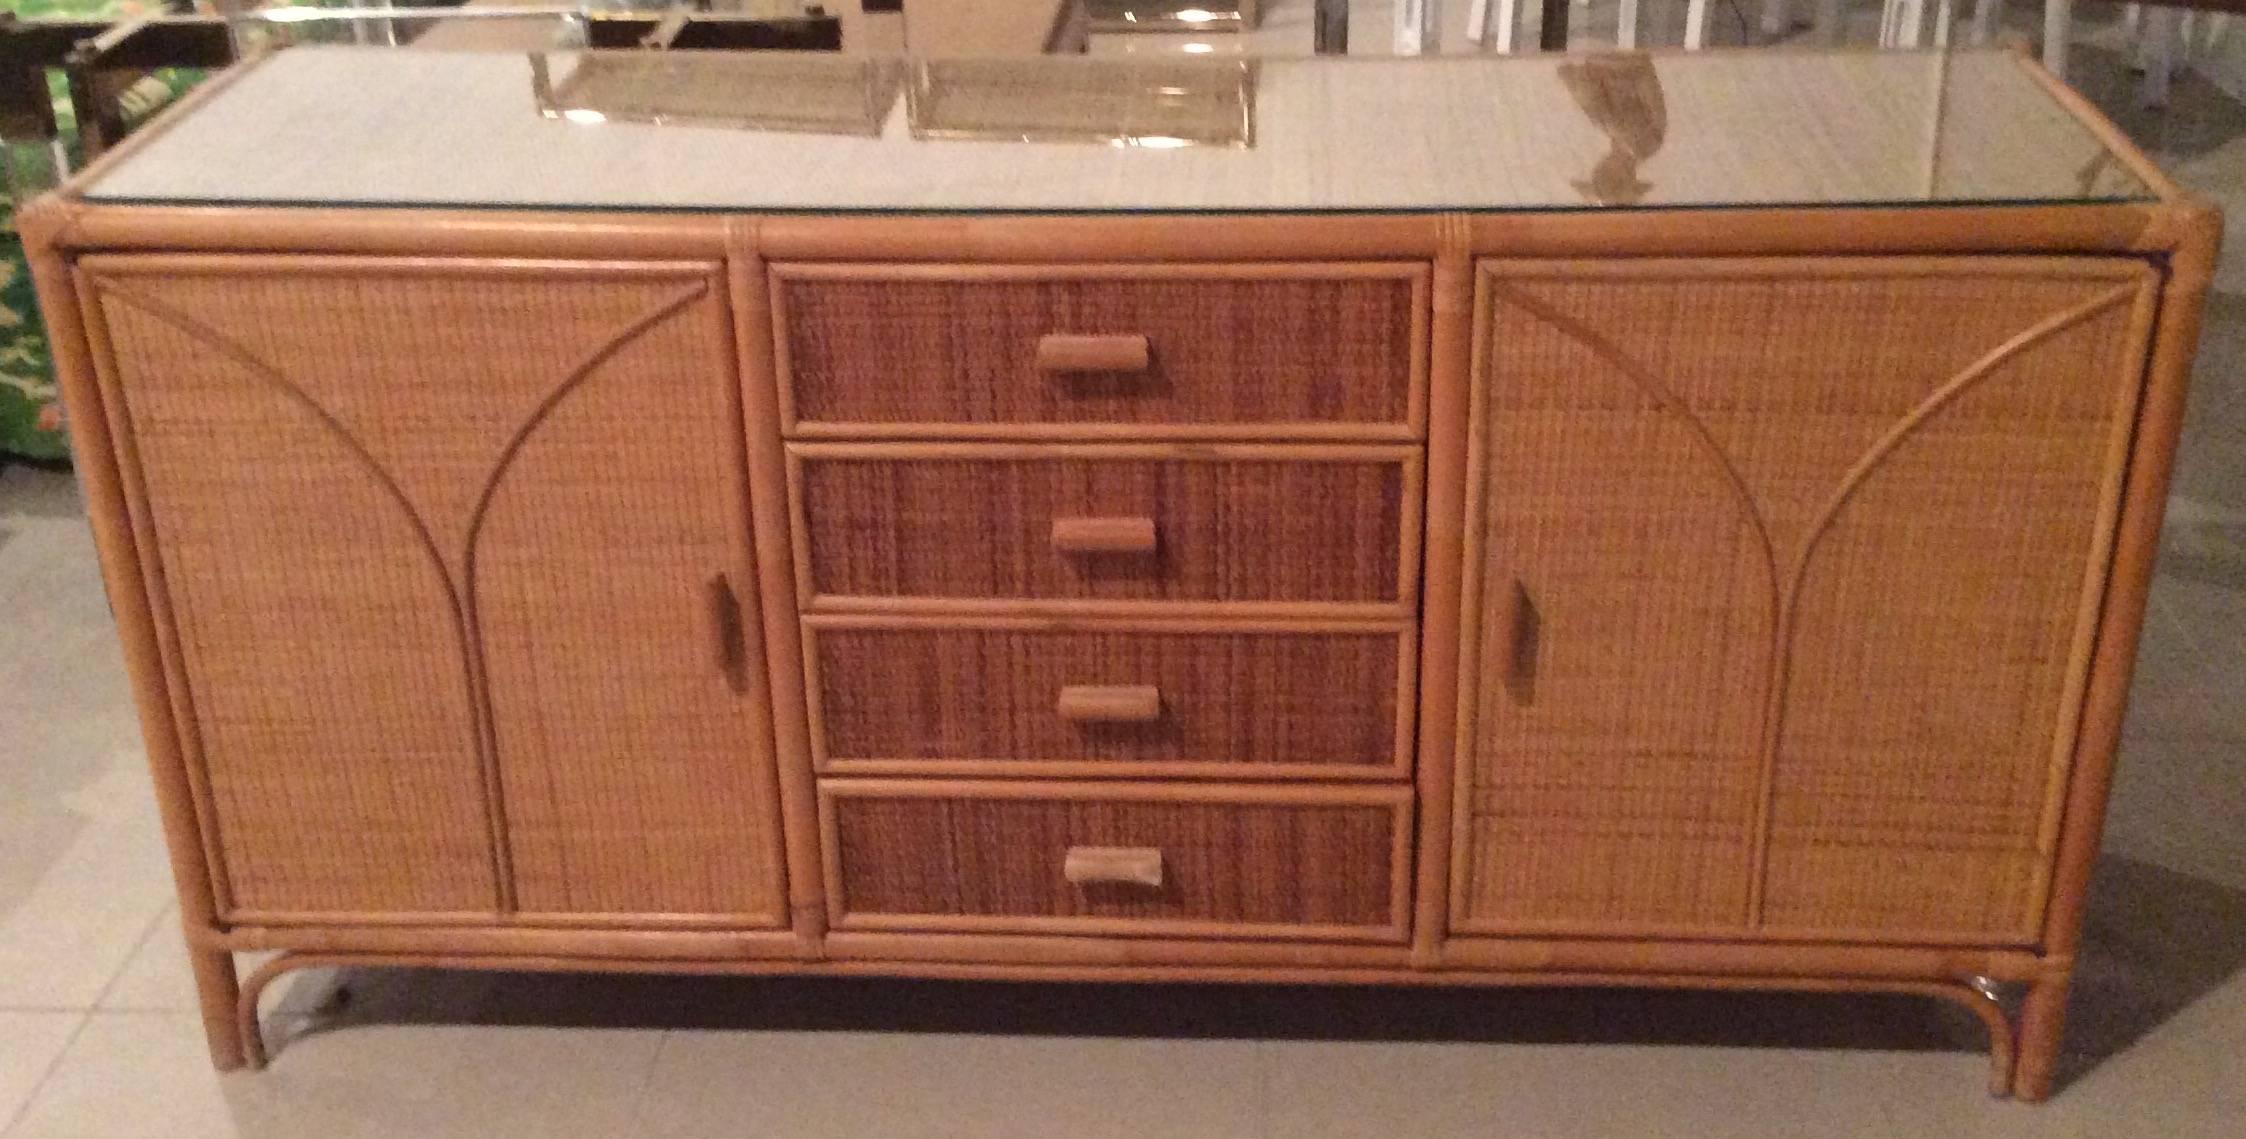 Vintage rattan woven wicker, faux bamboo, grasscloth credenza, buffet, or dresser with glass top. Top is woven wicker which is natural to have some variation in straightness which is corrected with the glass top. Great for a tropical, Palm Beach,